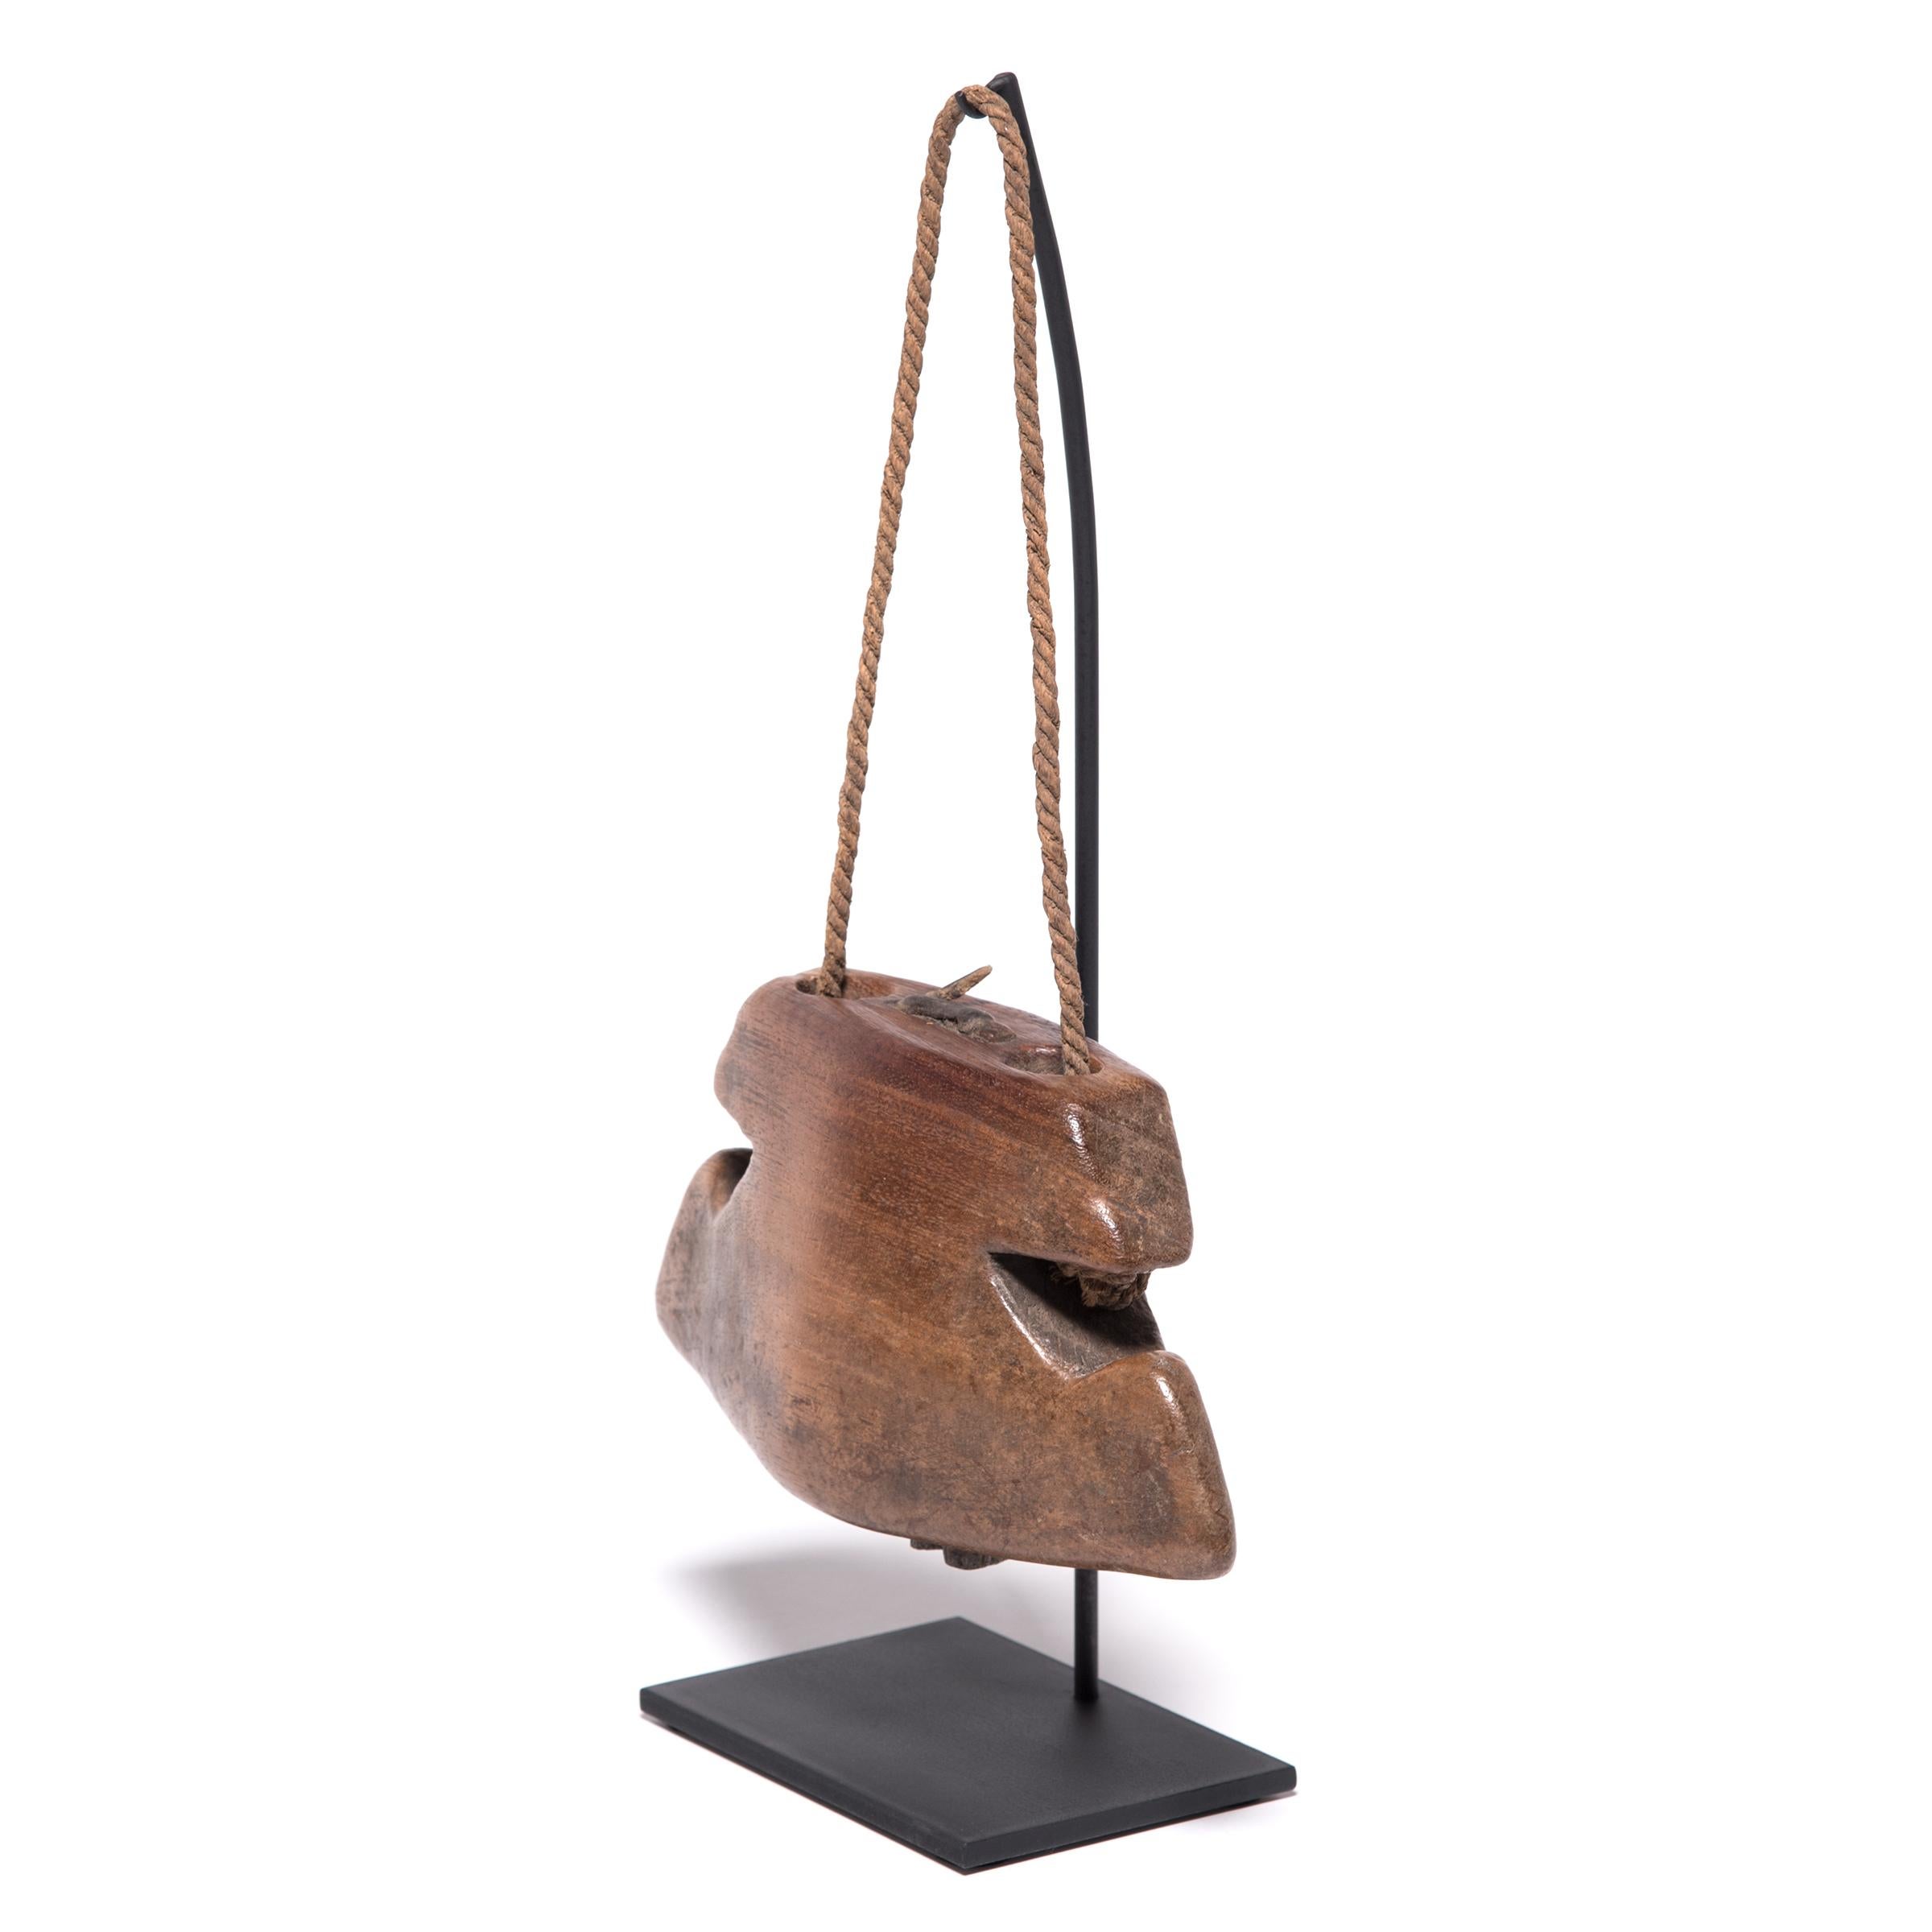 Necklaced on cows or used as percussive instruments in a traditional gamelan, cowbells are still a familiar sight in remote villages of Indonesia. Carved from a single piece of wood, this bell was crafted in Lombok, an island near Bali that is